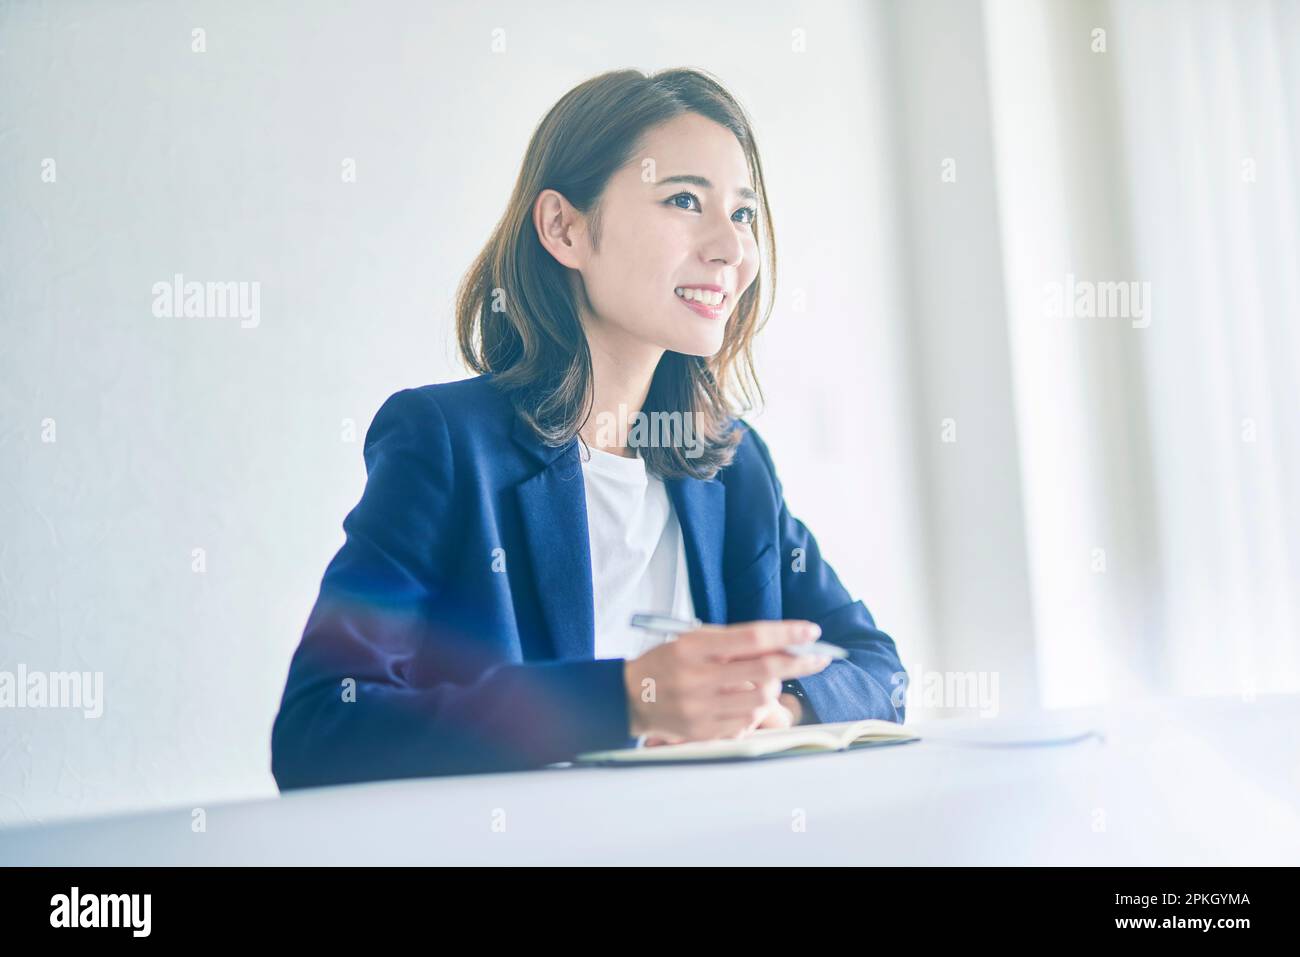 Woman taking notes with a smile Stock Photo